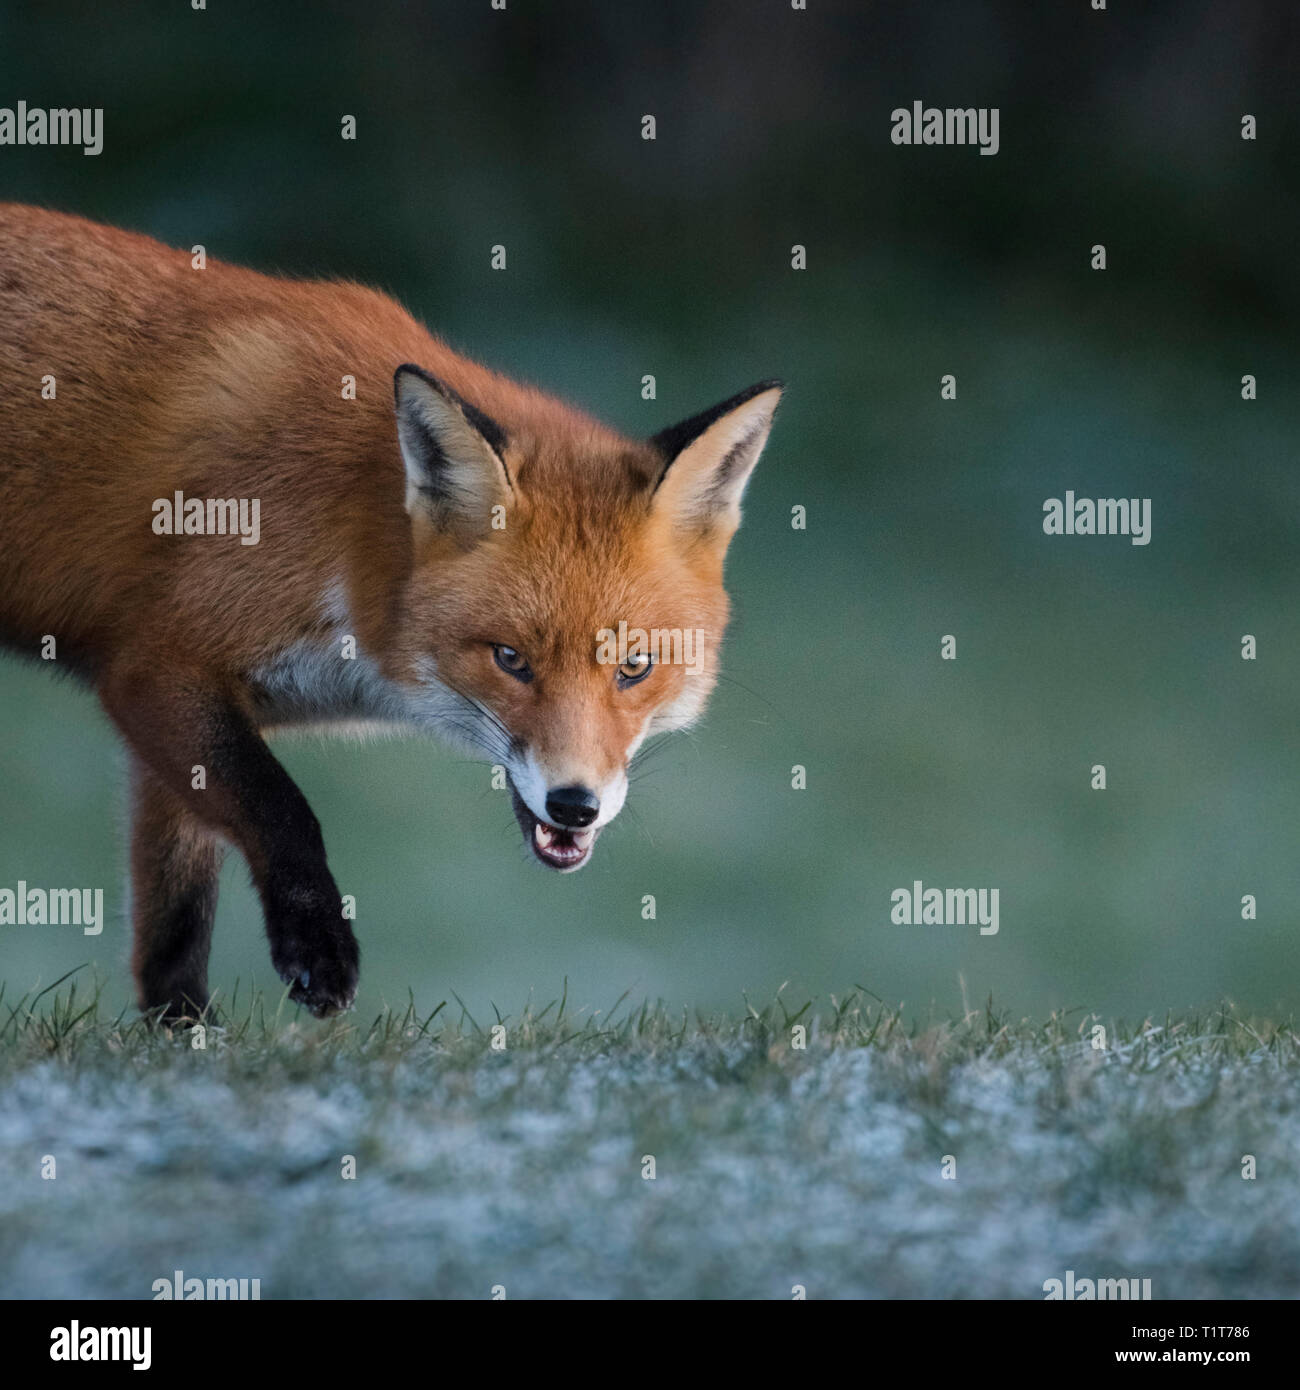 Sunrise on the North East coast in the UK with a European Red Fox searching for its first meal of the day on a cold frosty winter morning. Stock Photo